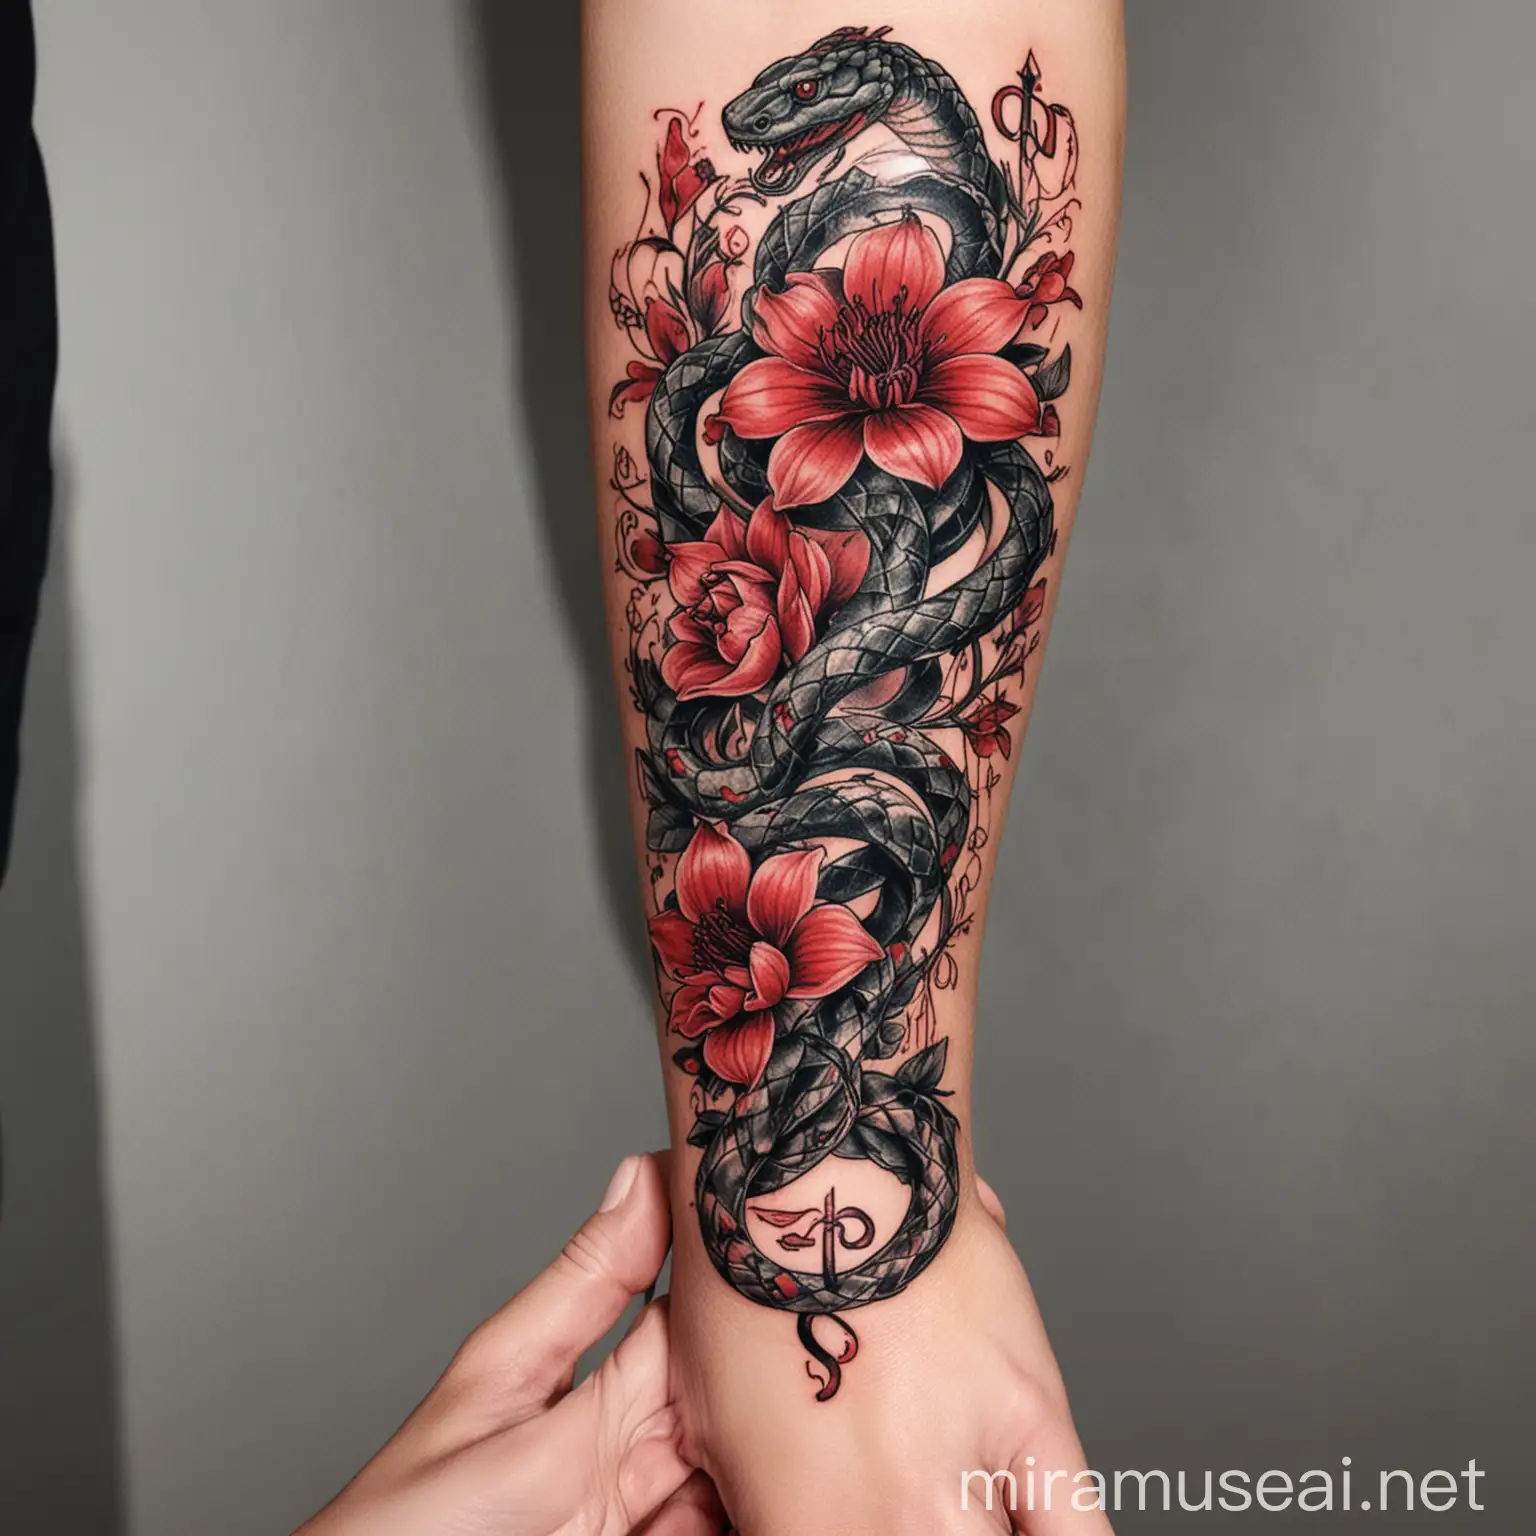 Tattoo Design Red Flowers Blessing Sigil and Snake Forearm Art